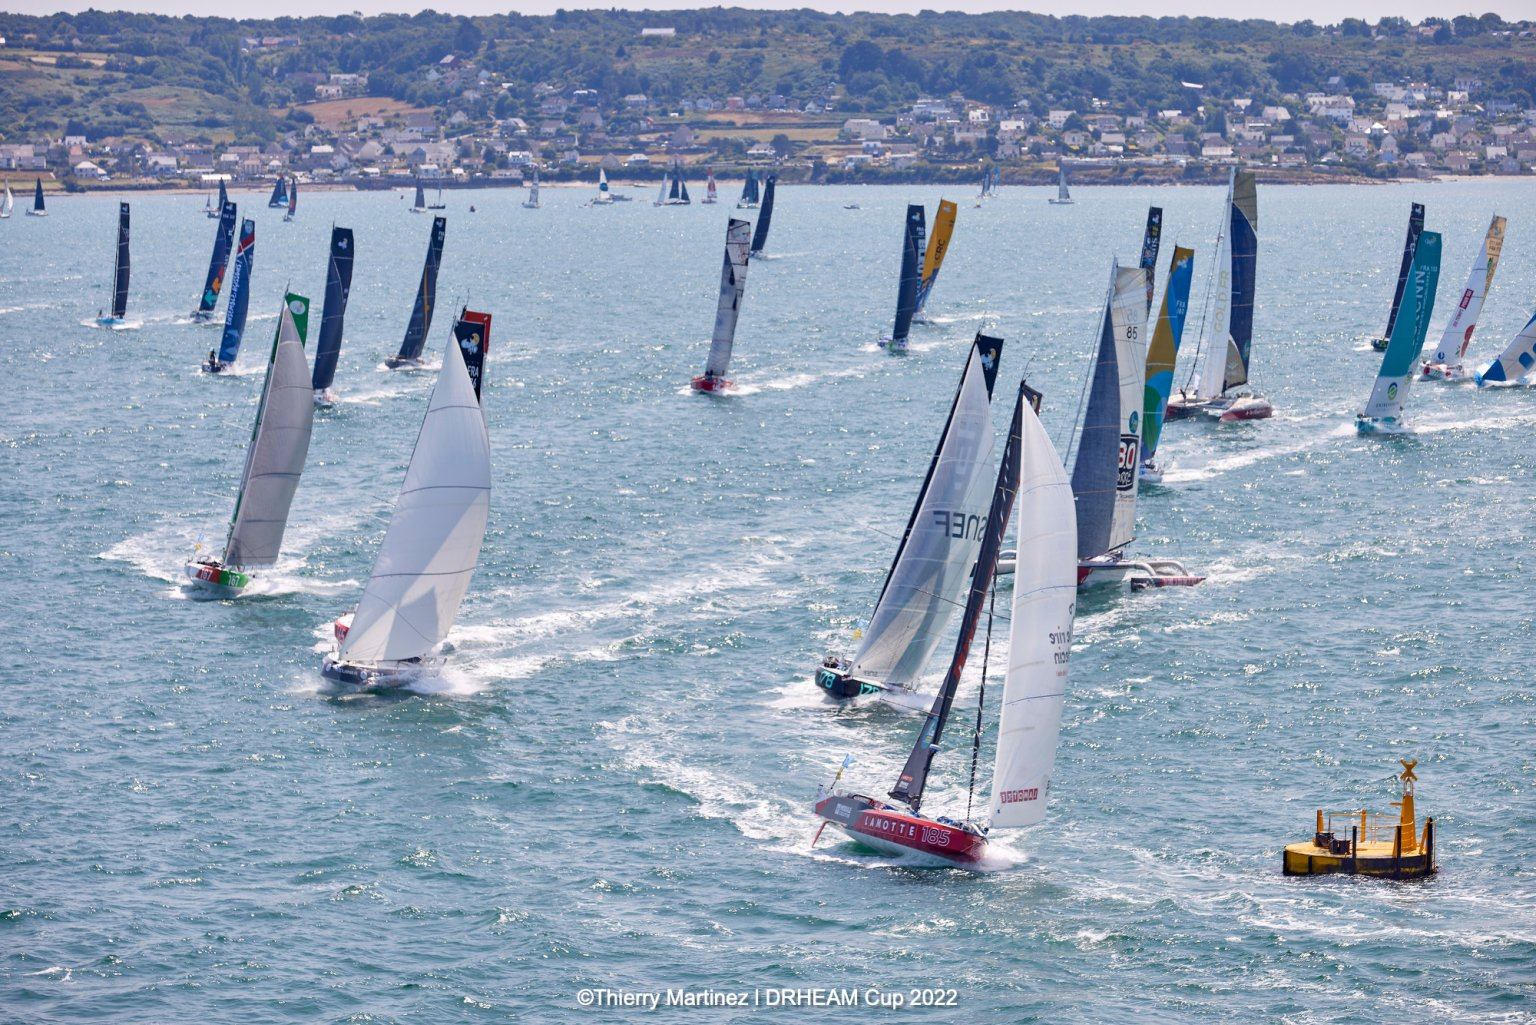  Class 40, Figaro 3, IRC  Drheam Cup  Cherourg FRA  Day 1